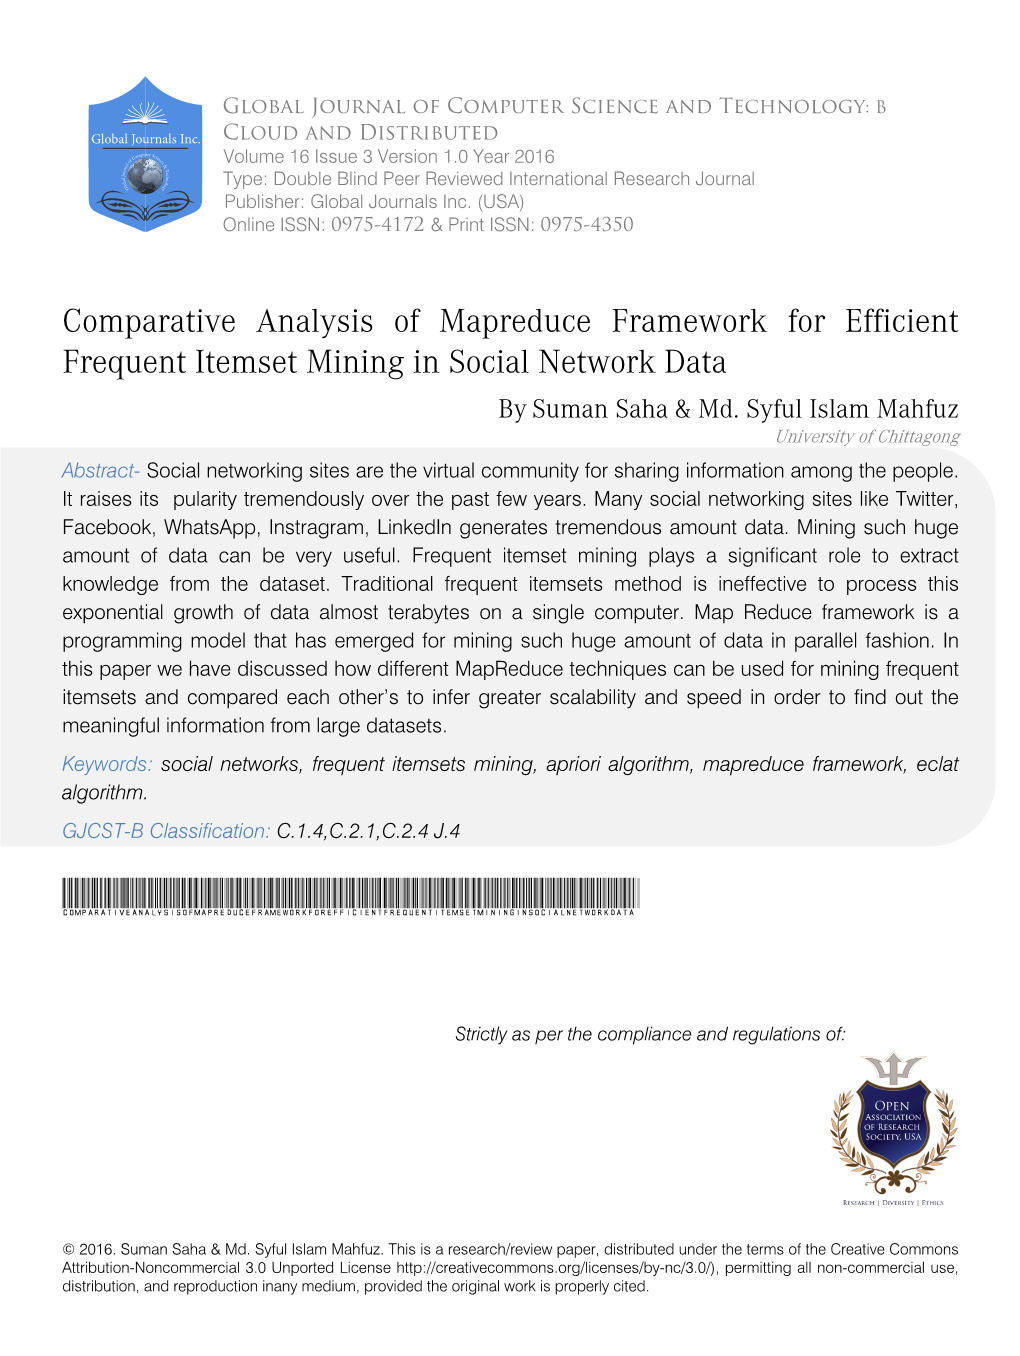 Comparative Analysis of Mapreduce Framework for Efficient Frequent Itemset Mining in Social Network Data by Suman Saha & Md